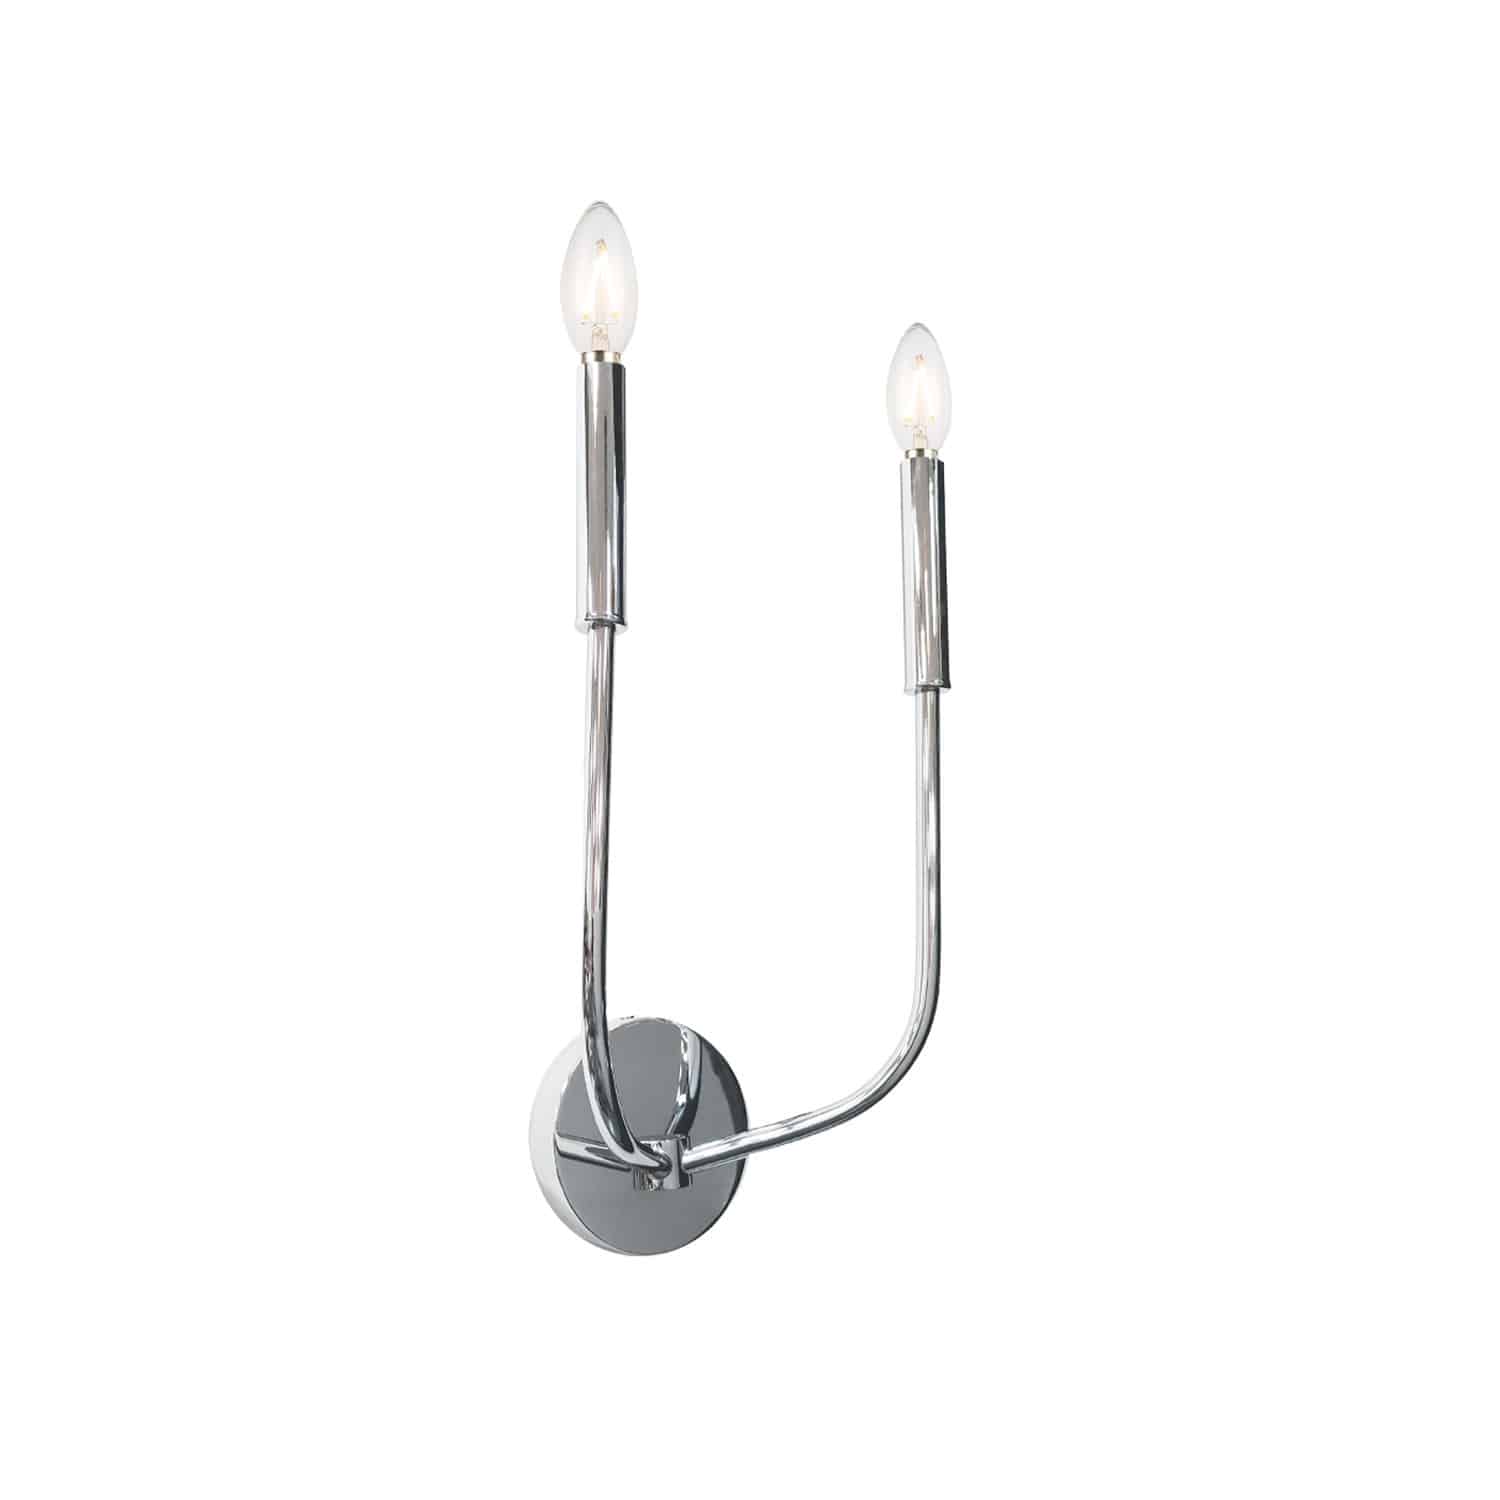 2 Light Incandescent Wall Sconce, Polished Chrome